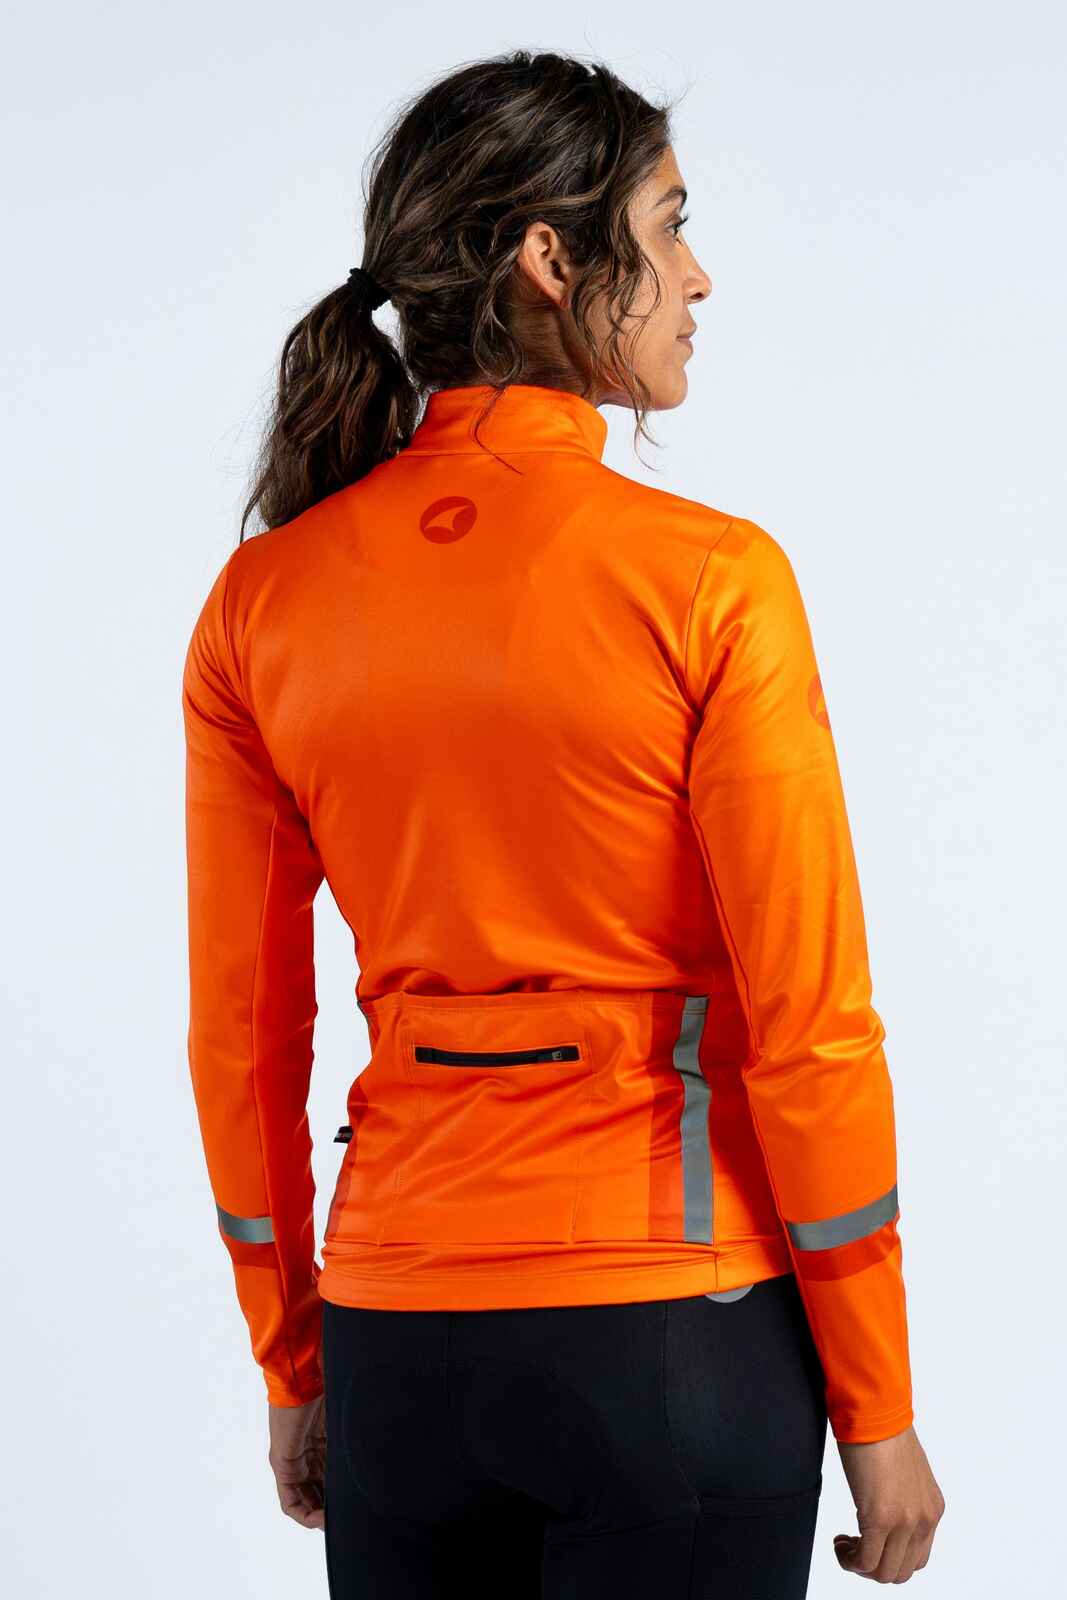 Women's Red/Orange Thermal Cycling Jersey - Back View